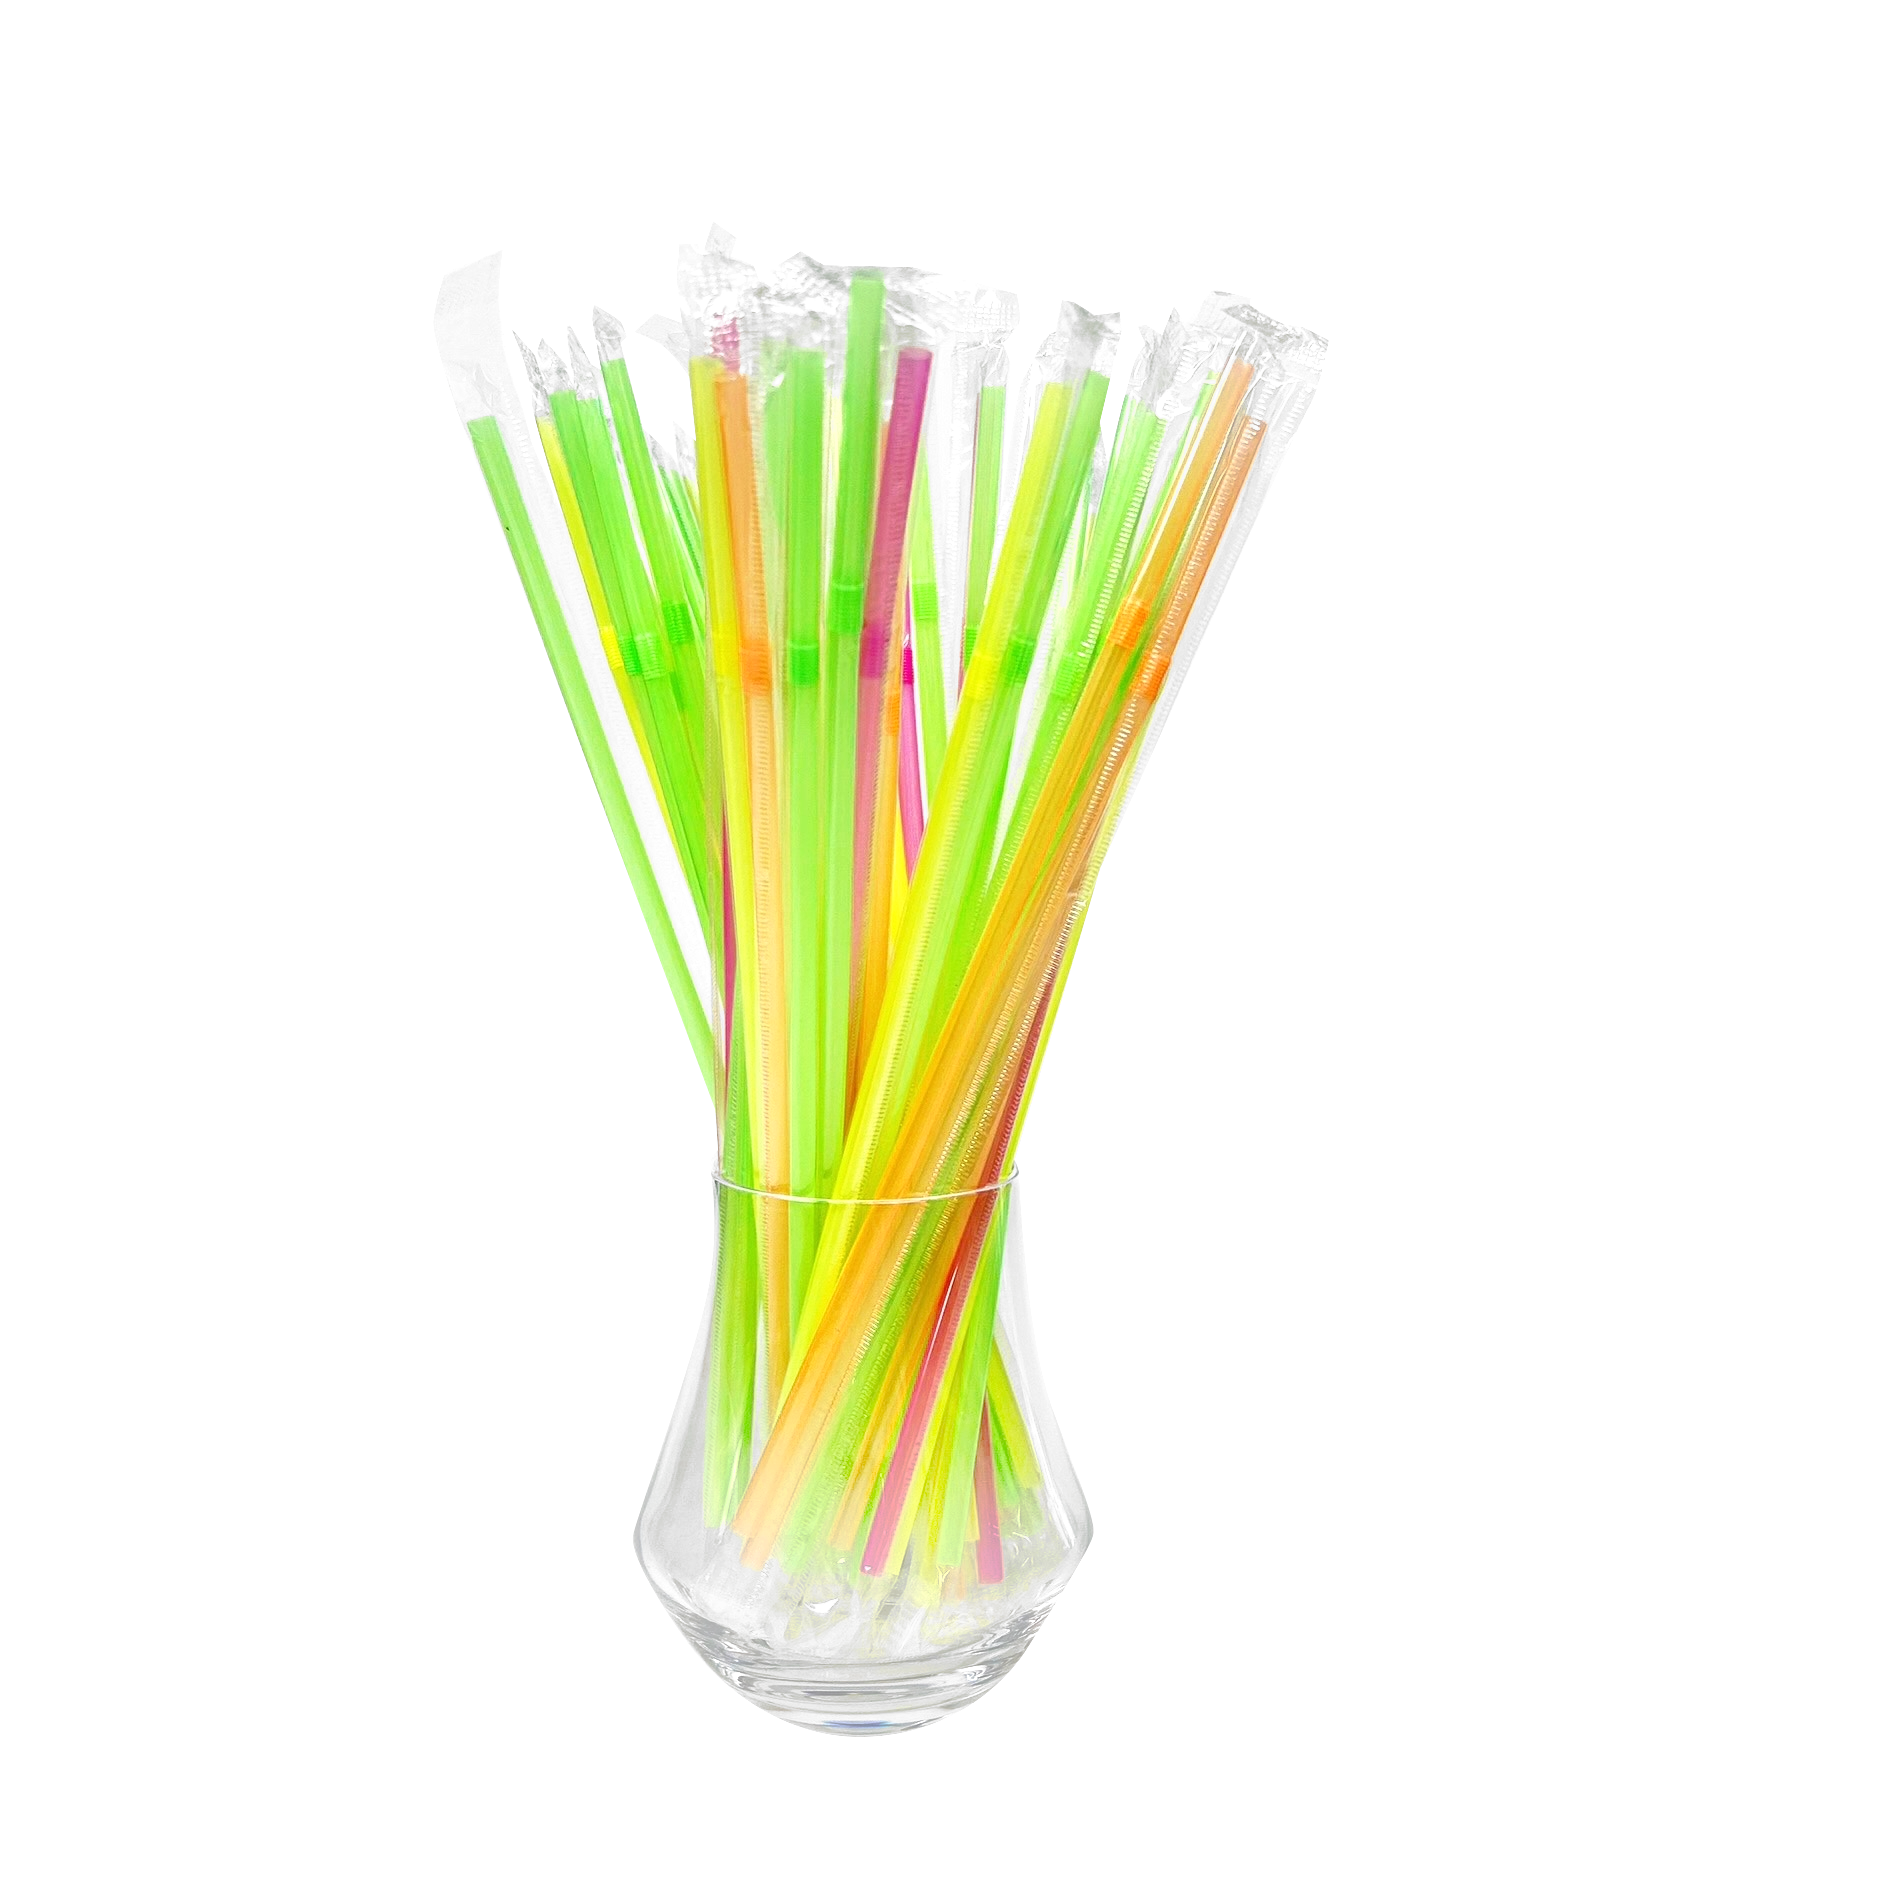 JY-PS-003 5mm*240mm Flexible Colored Plastic Drinking Straw